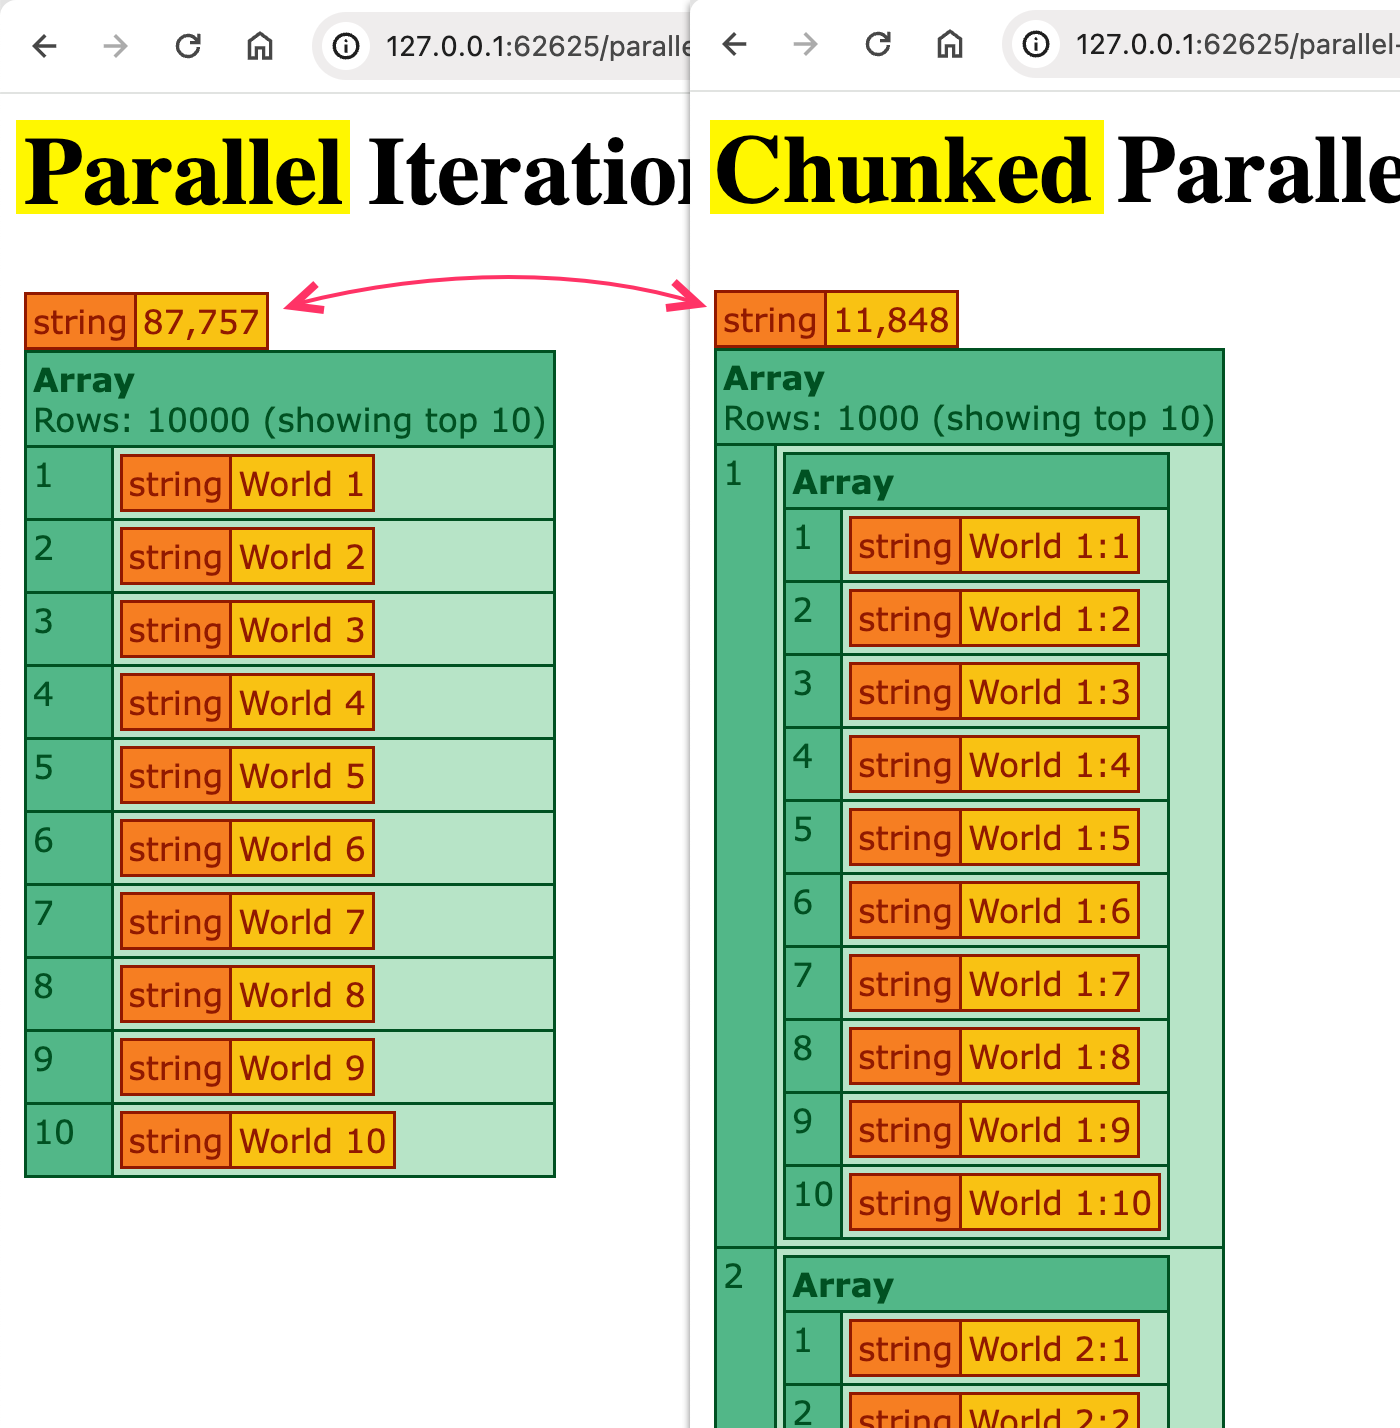 Screenshots of the two tests showing that the plain parallel iteration took about 87 seconds to complete and the chunked parallel iteration took about 12 seconds to complete.